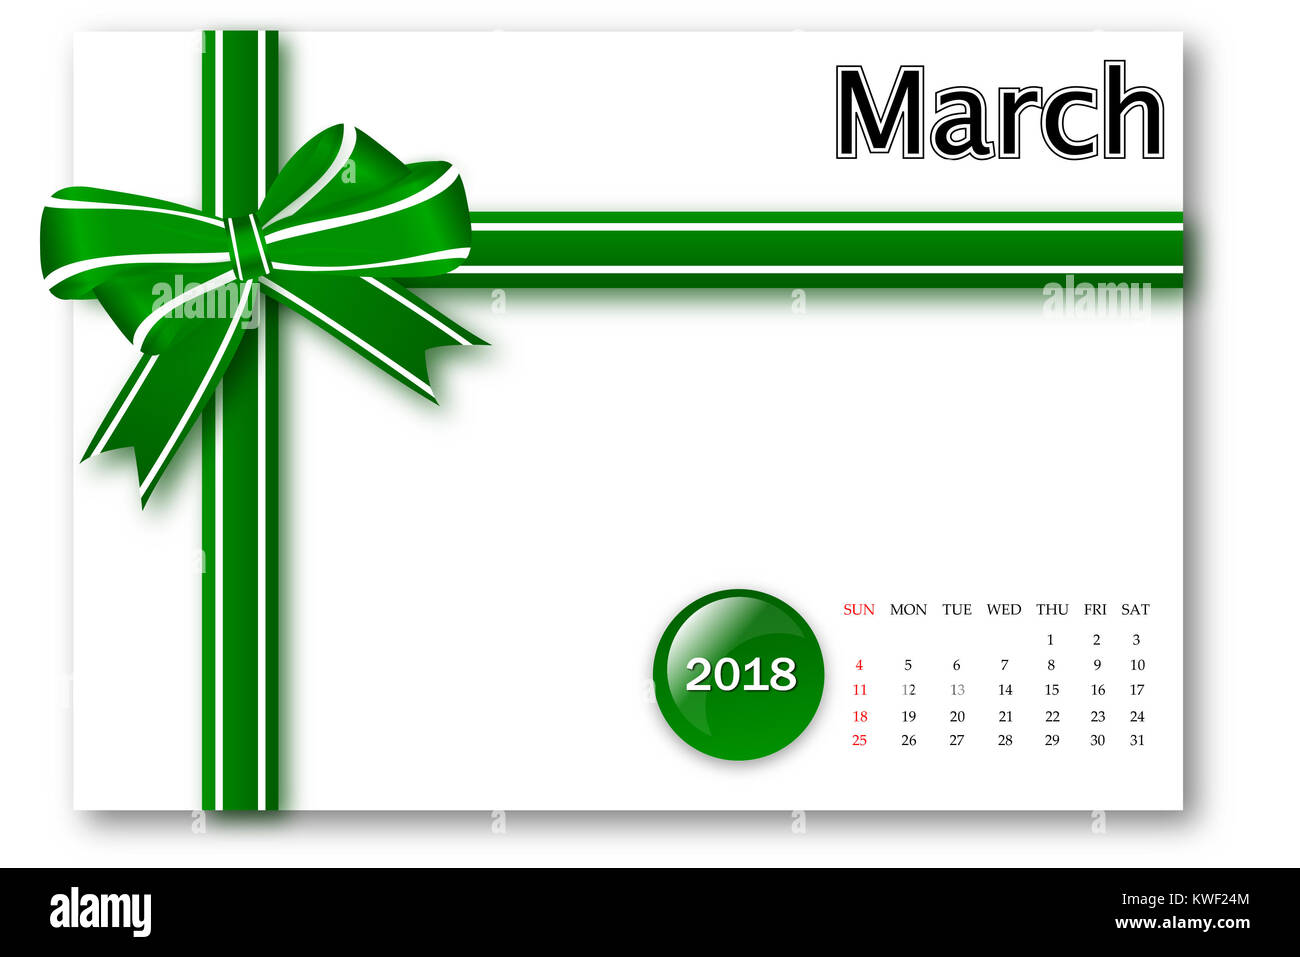 March 2018 - Calendar series with gift ribbon design Stock Photo